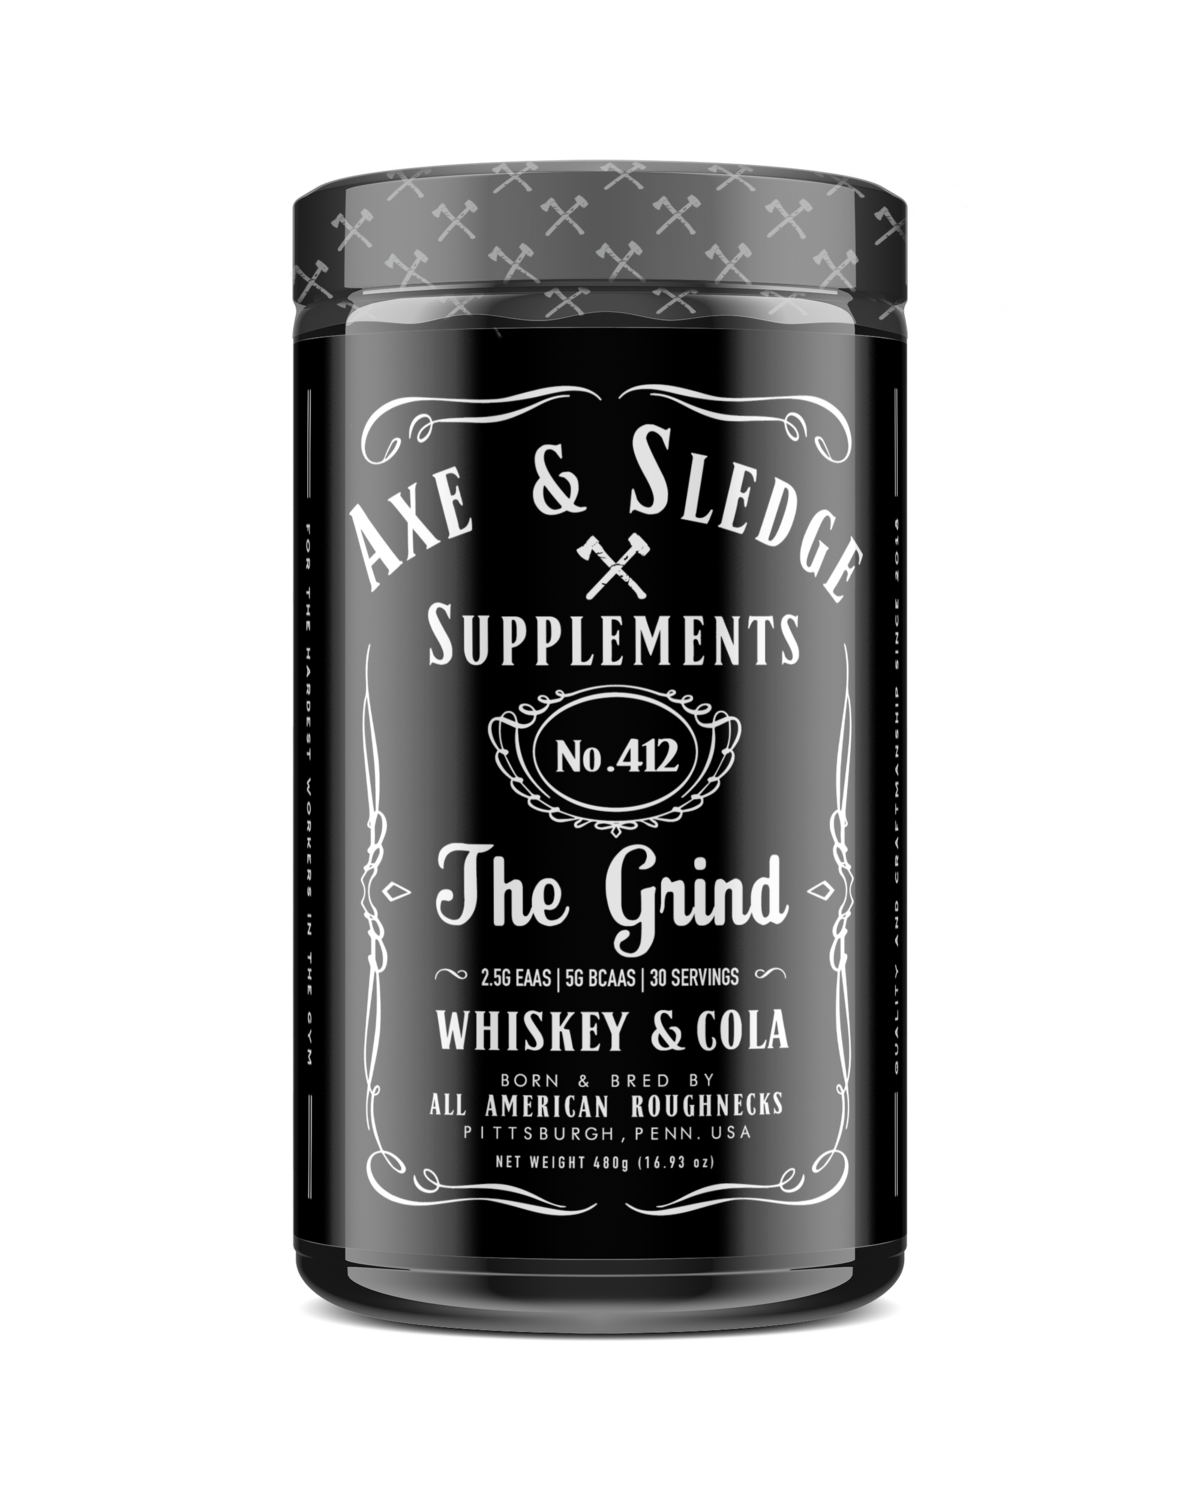 https://nutritionhqquincy.com/wp-content/uploads/2020/03/Axe-Sledge-Grind-Whiskey-Cola.png